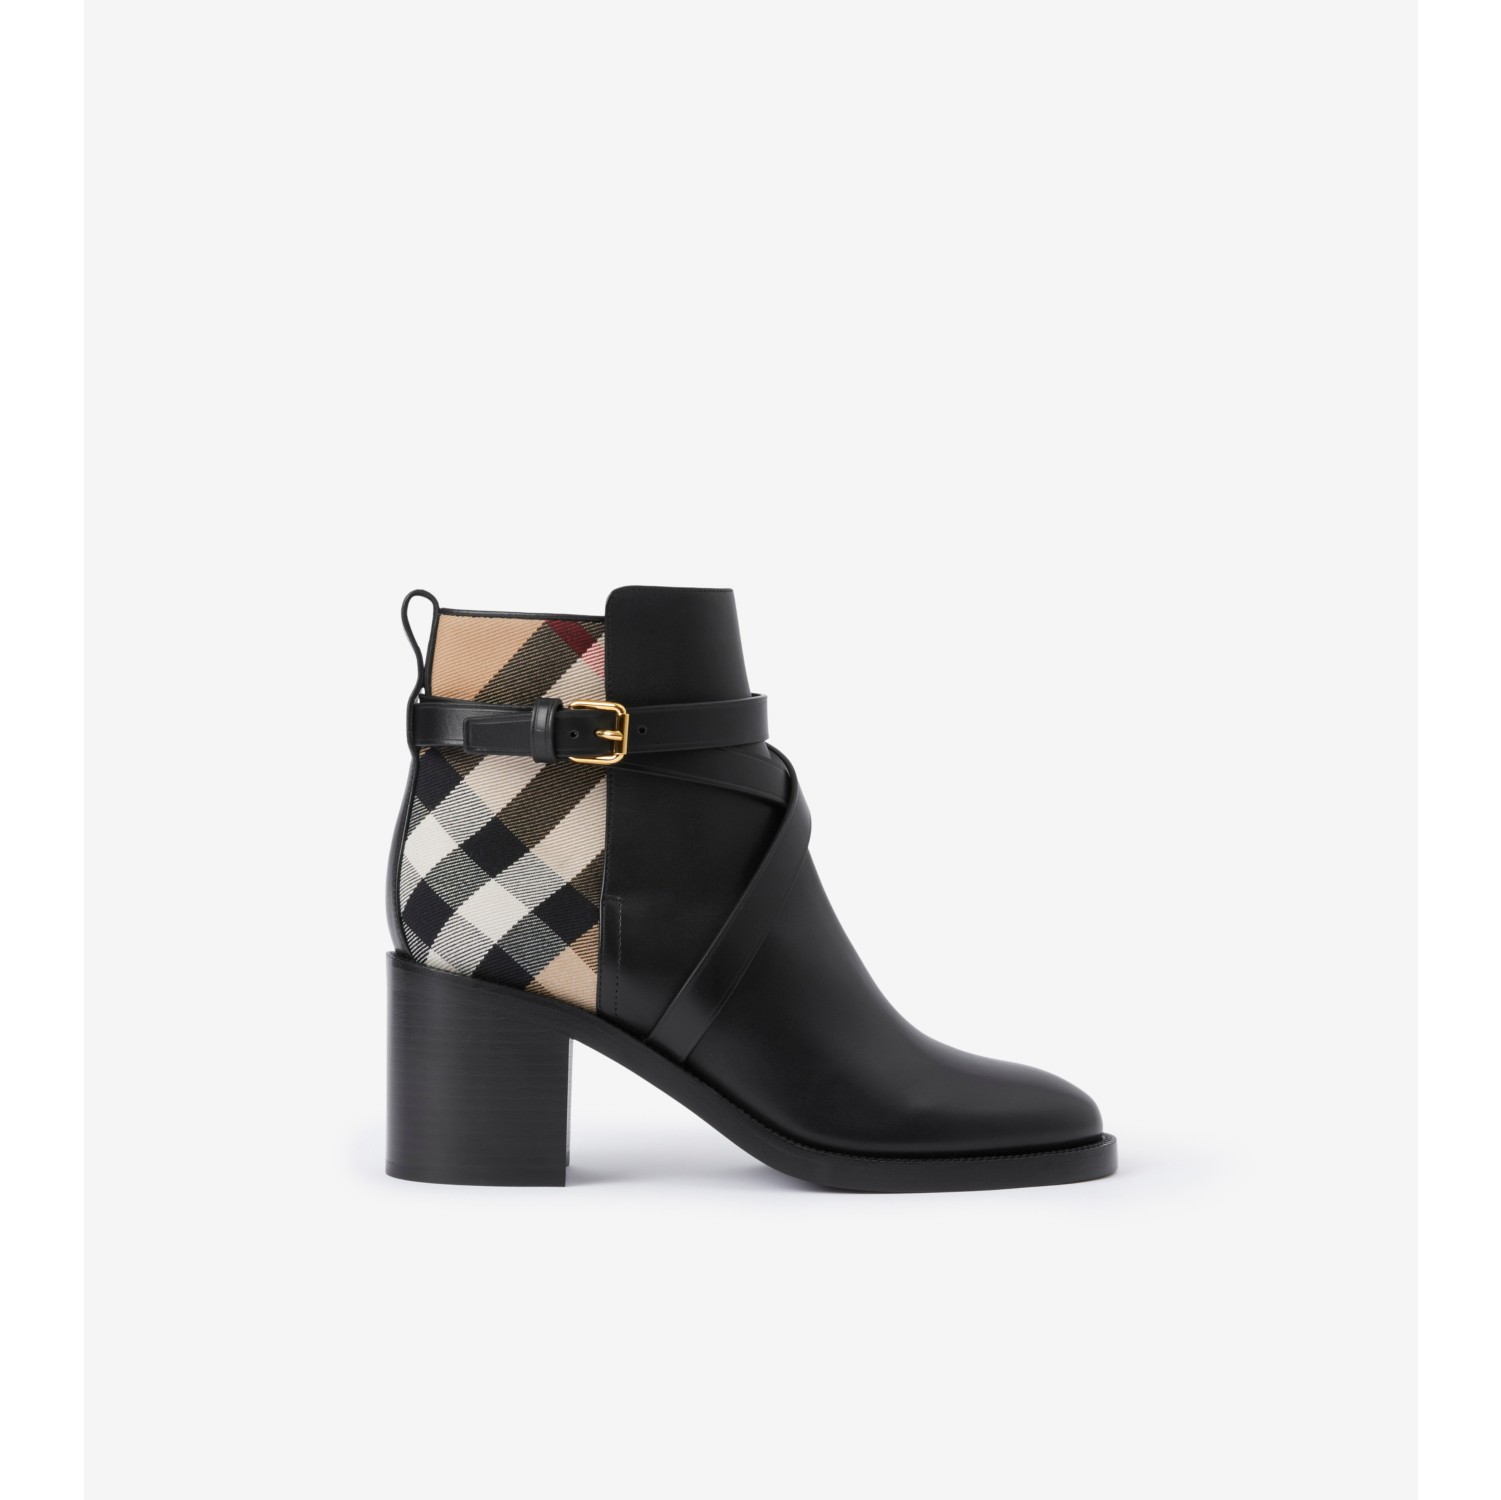 House Check and Leather Ankle Boots in Black/archive beige - Women